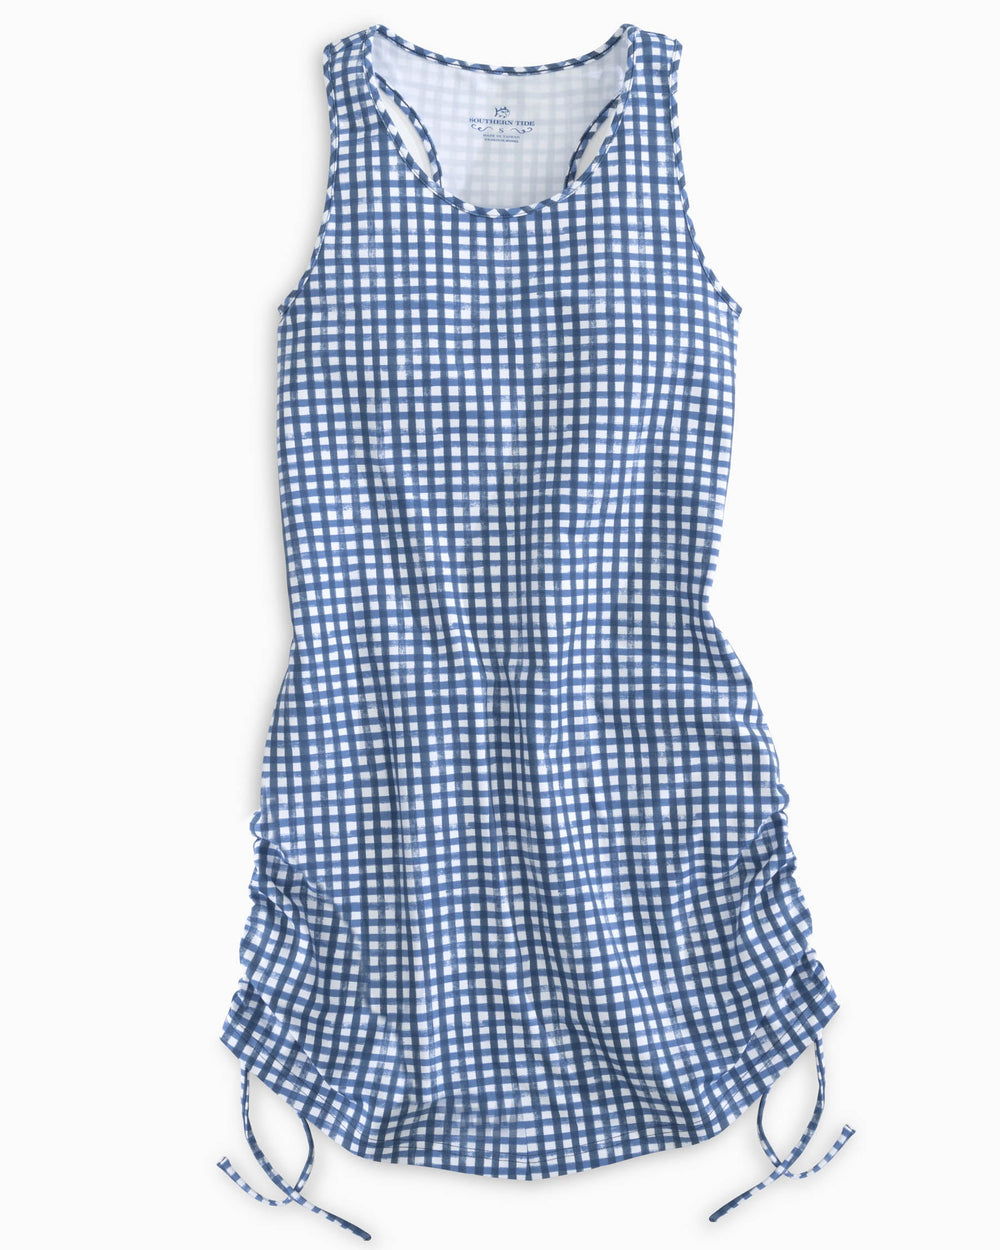 The front flat view of the Kinsley Performance Dress by Southern Tide - Seven Seas Blue